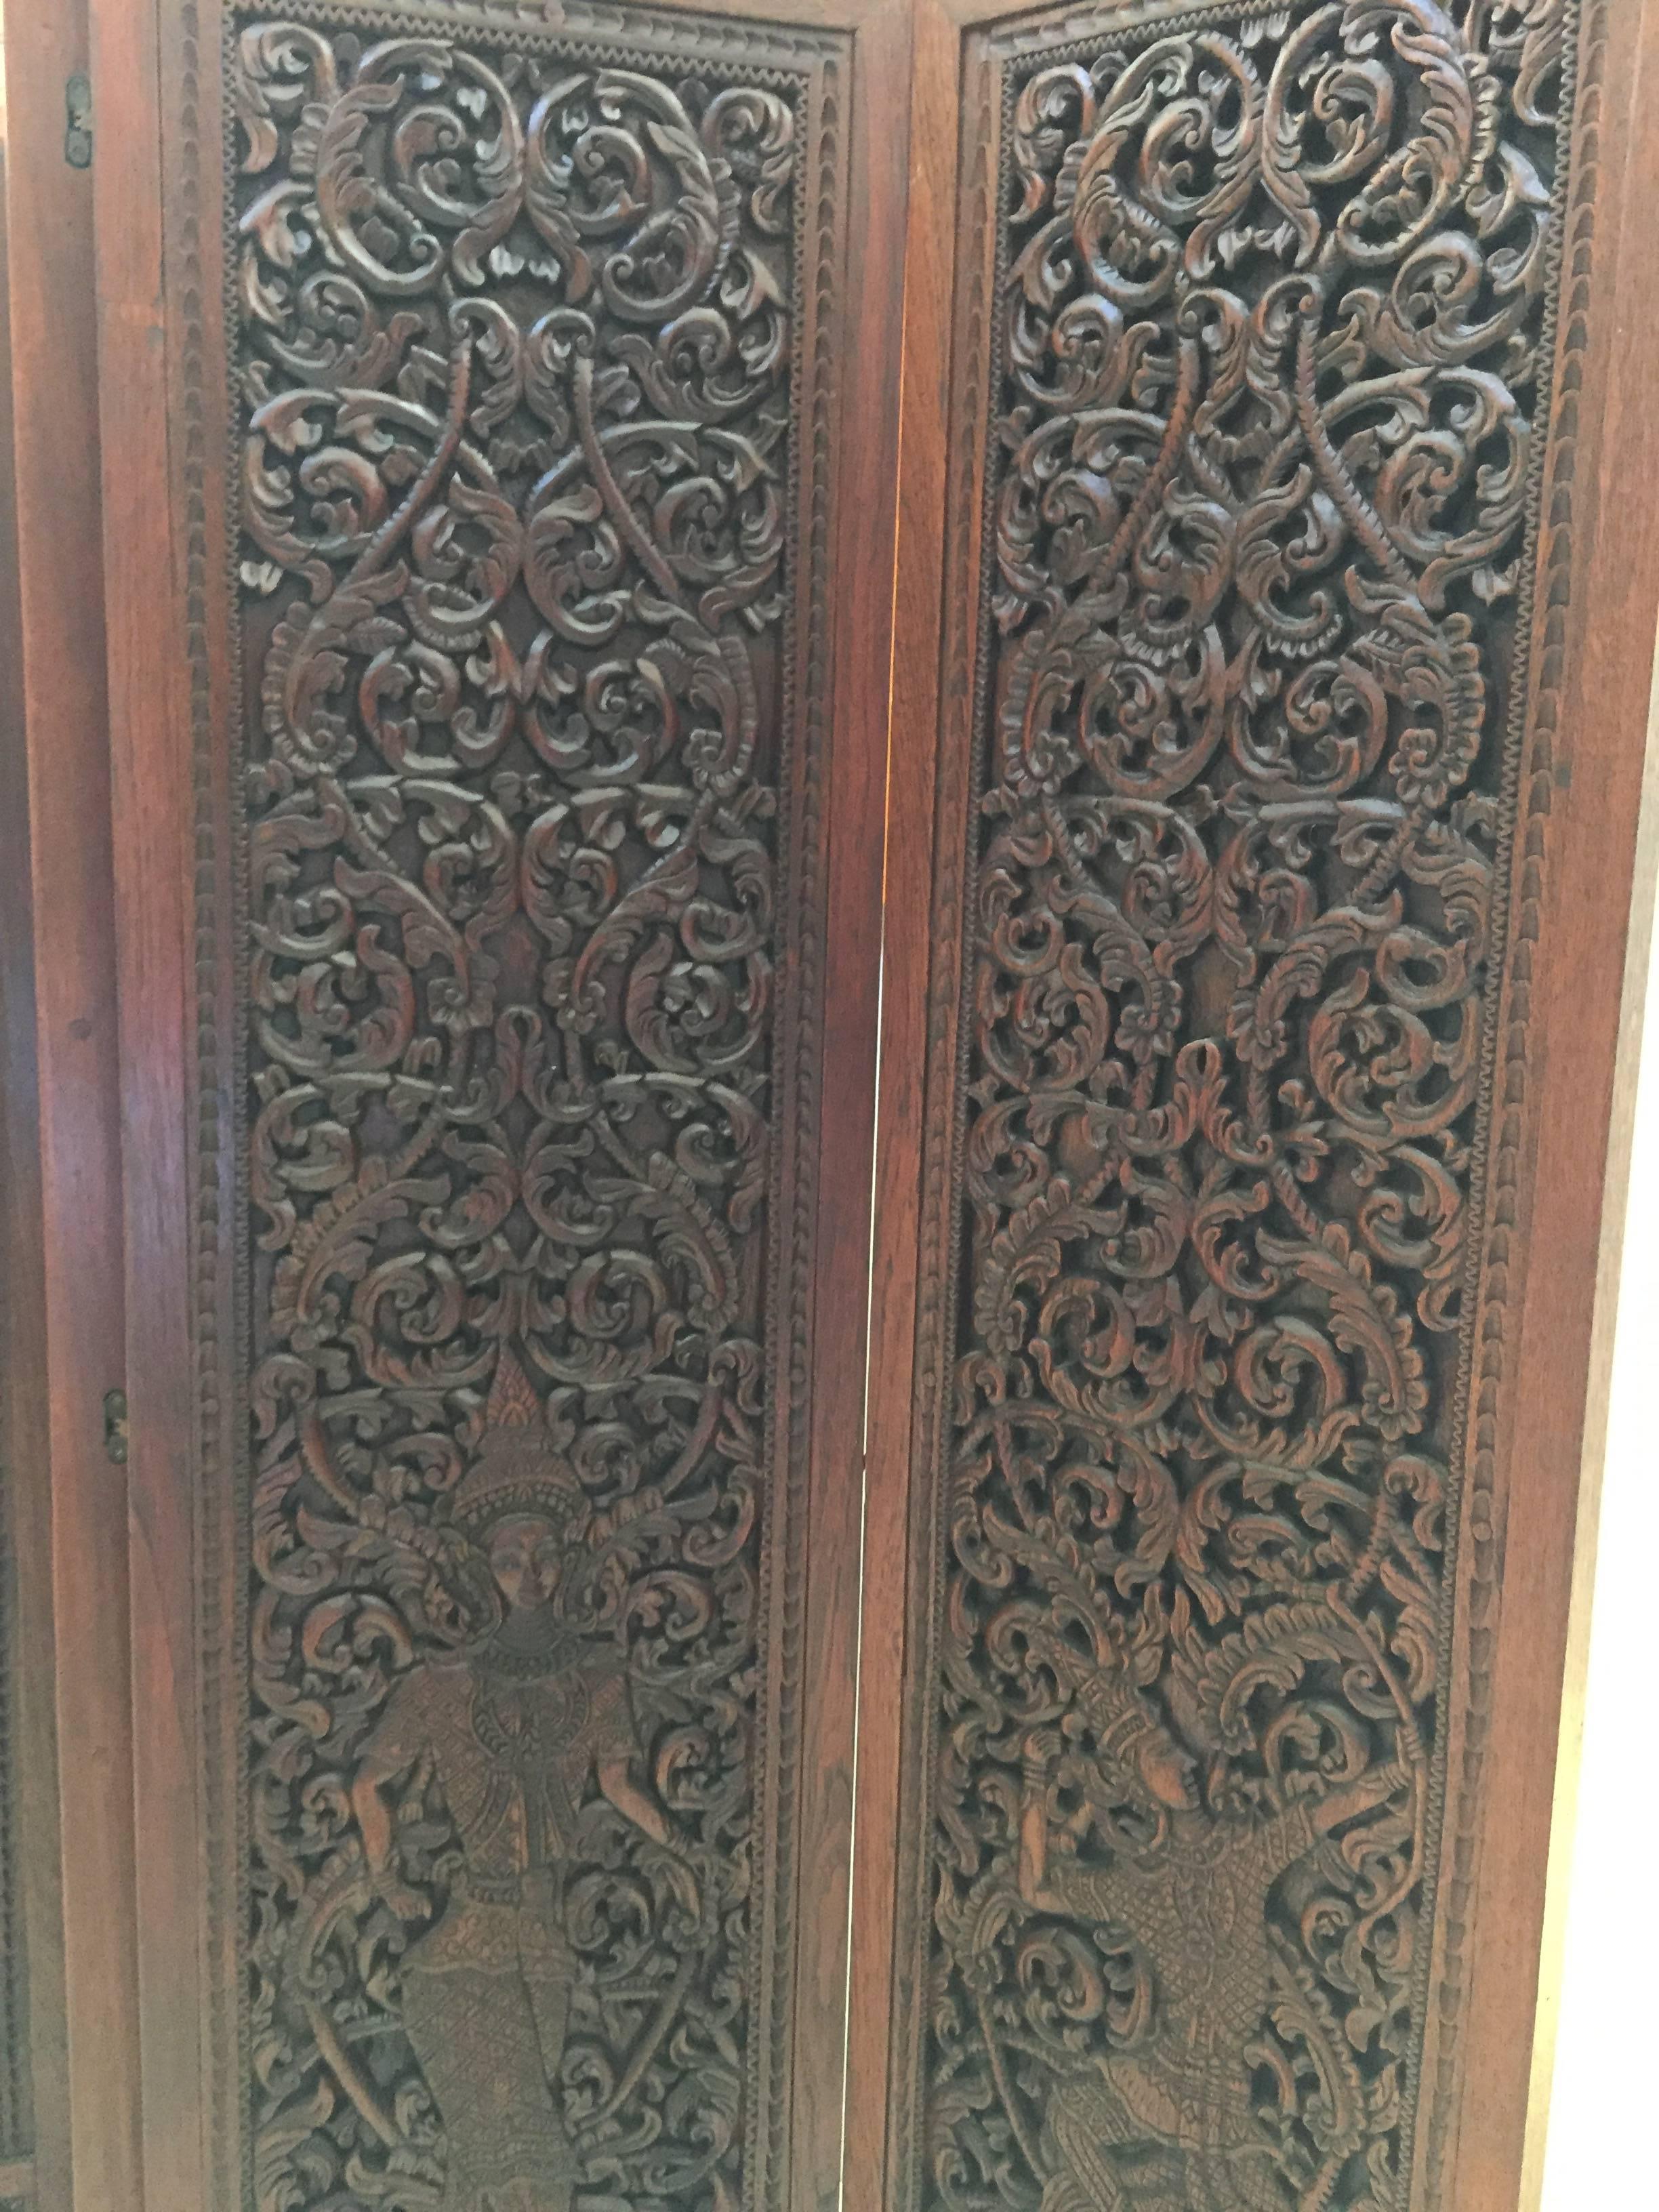 Colonial Revival Asian Hand-Carved Wood Five Panels Double-Sided Folding Screen Room Divider